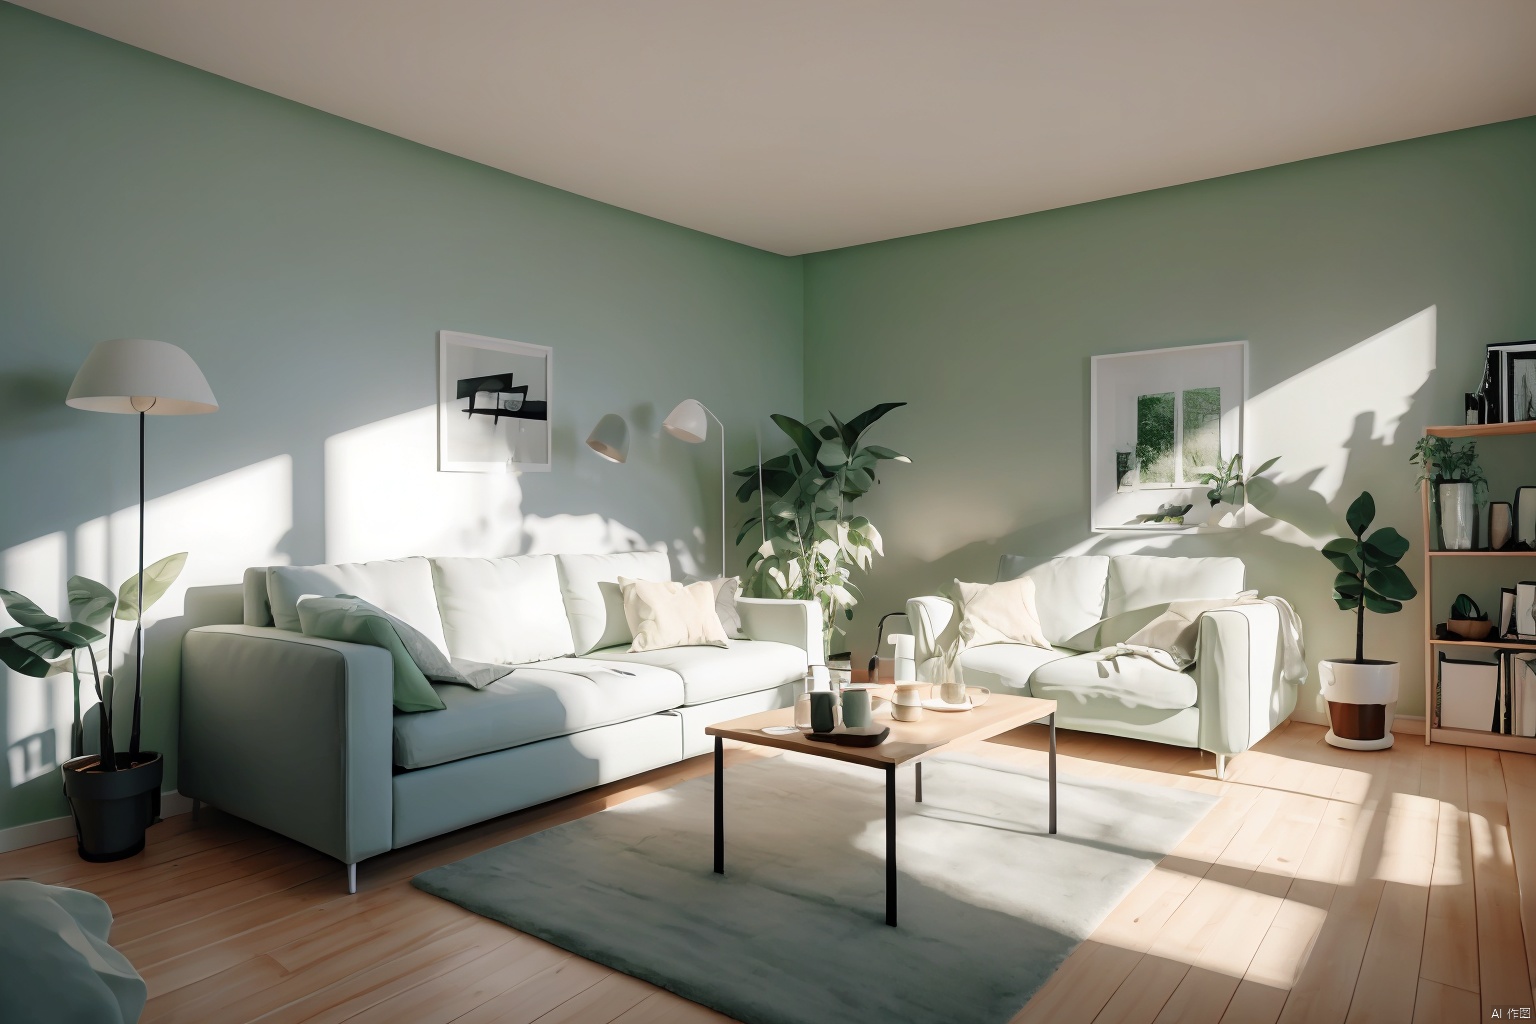  Interior design, couch, Potted plant, Coffee table, Light green wall, Ikea style, True light and shadow, UHD, high details, best quality, 4K